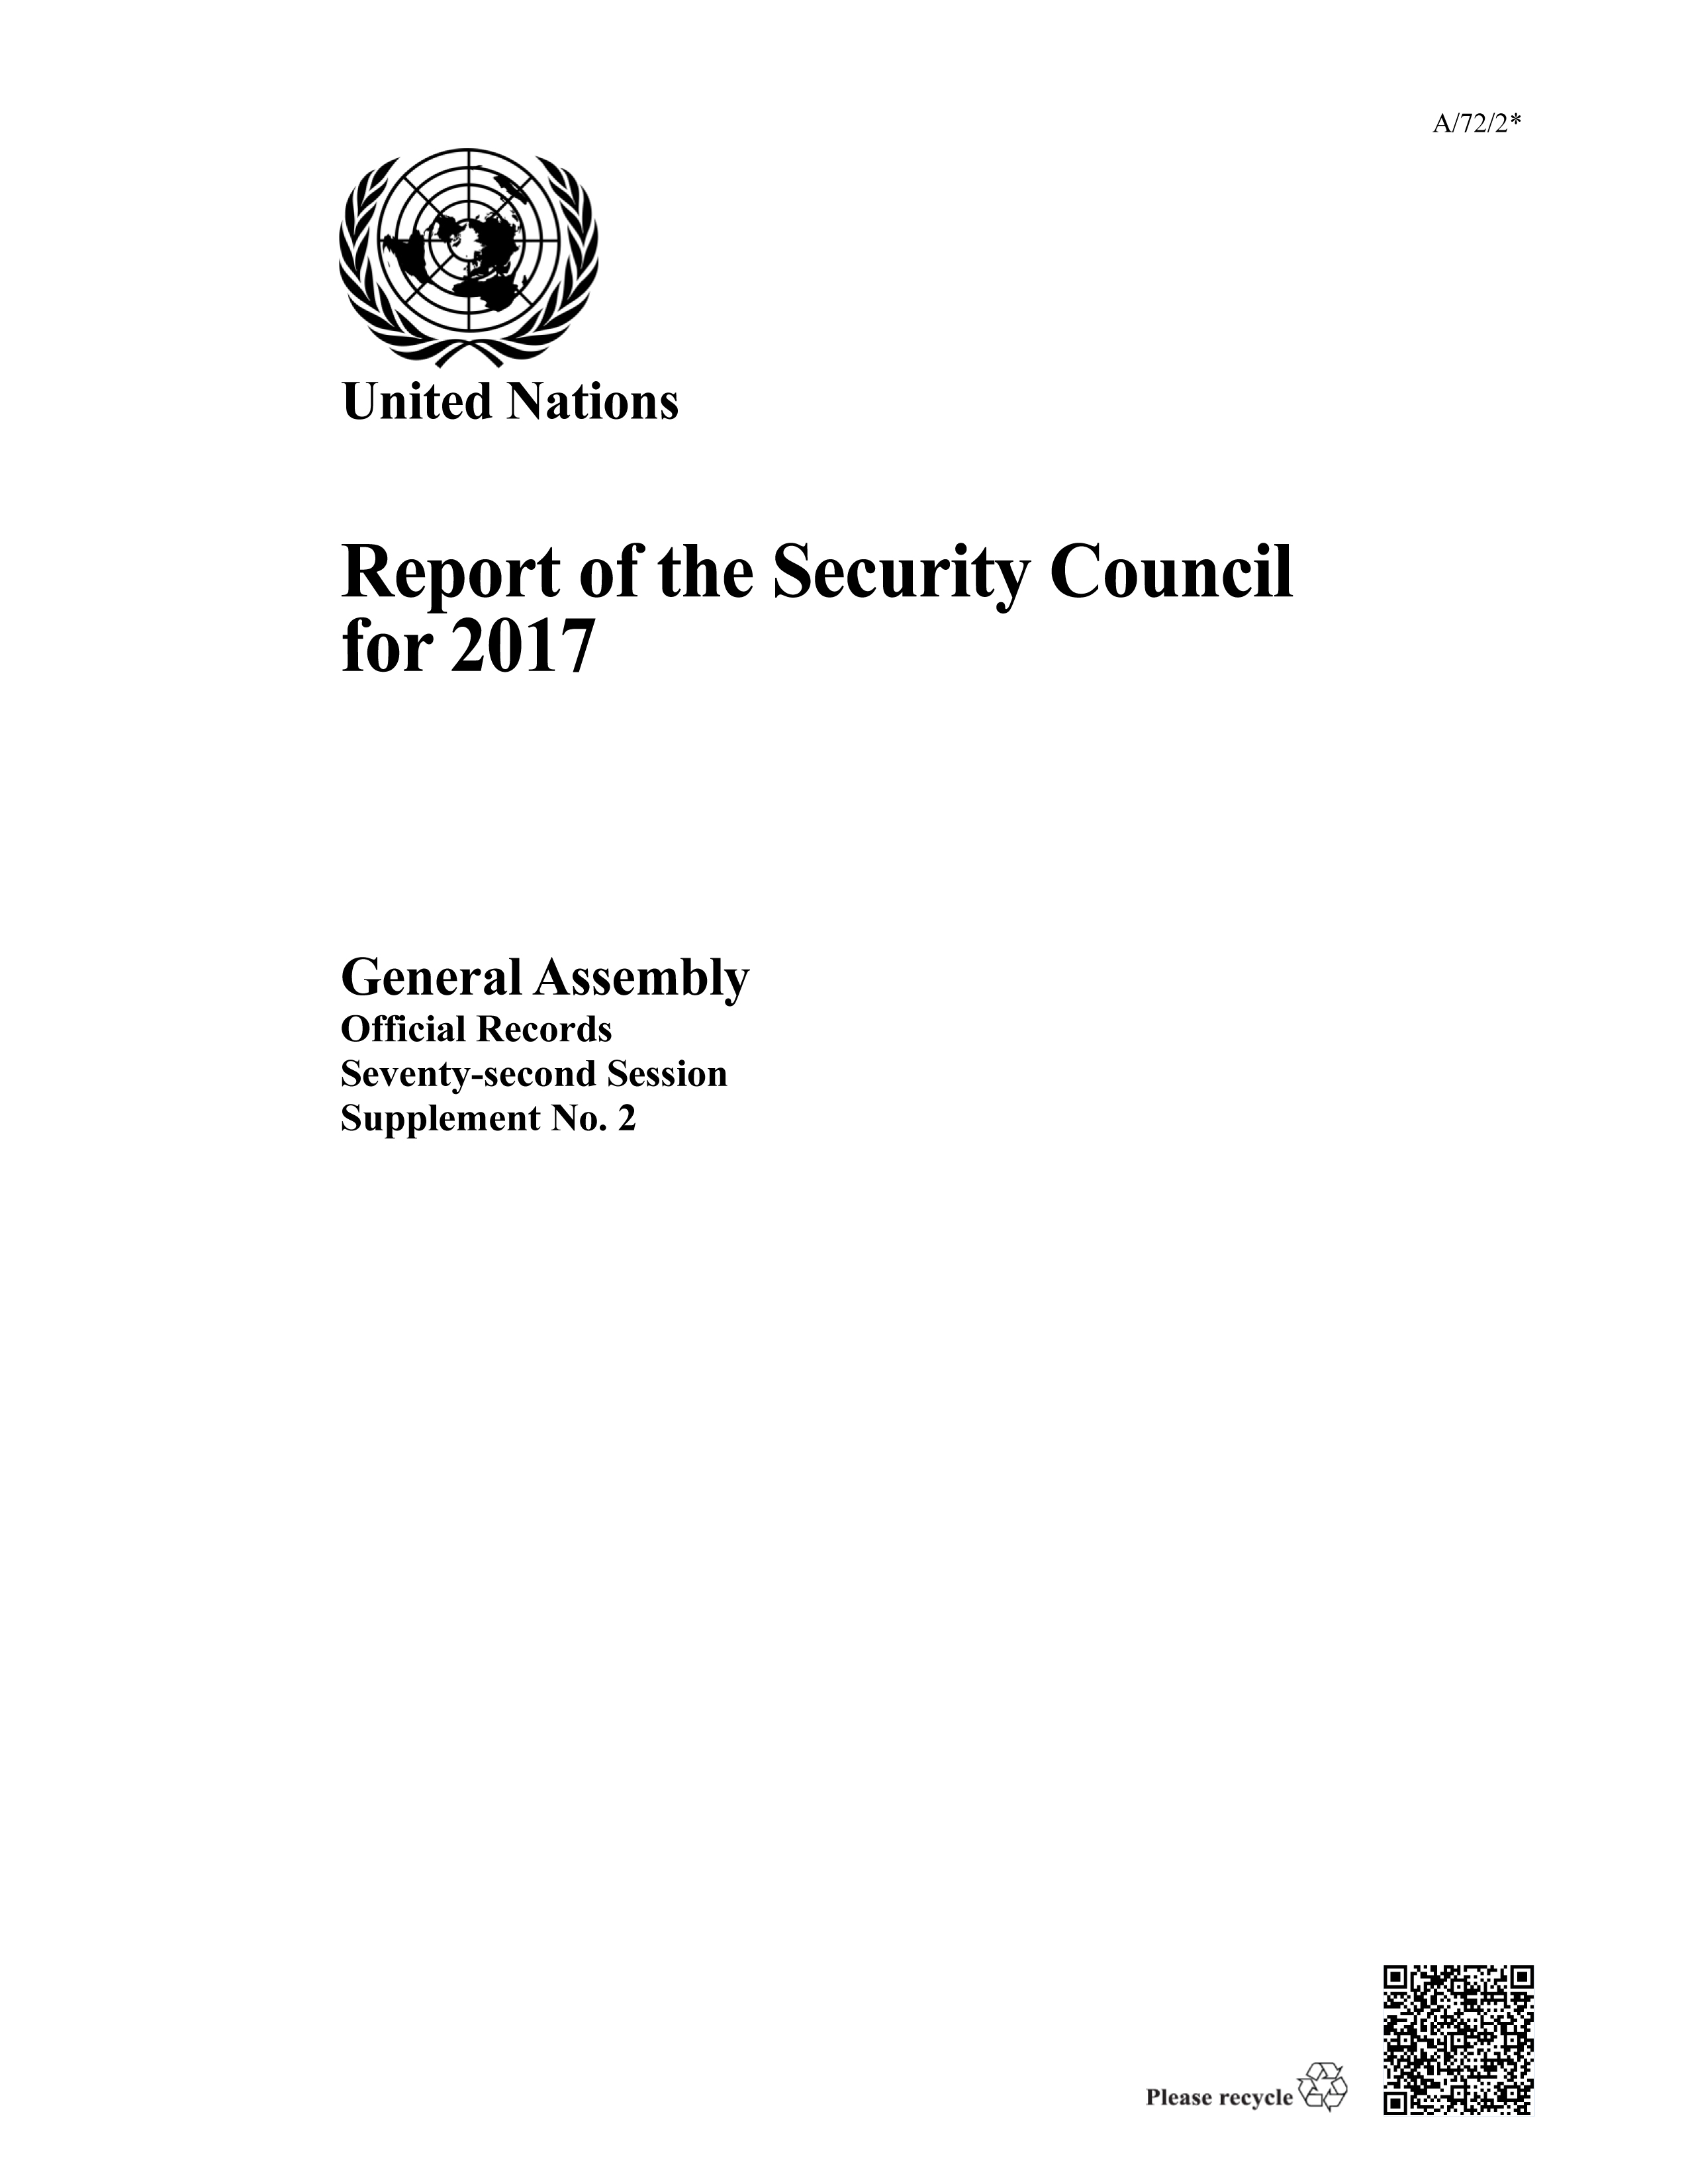 image of Report of the Security Council for 2017